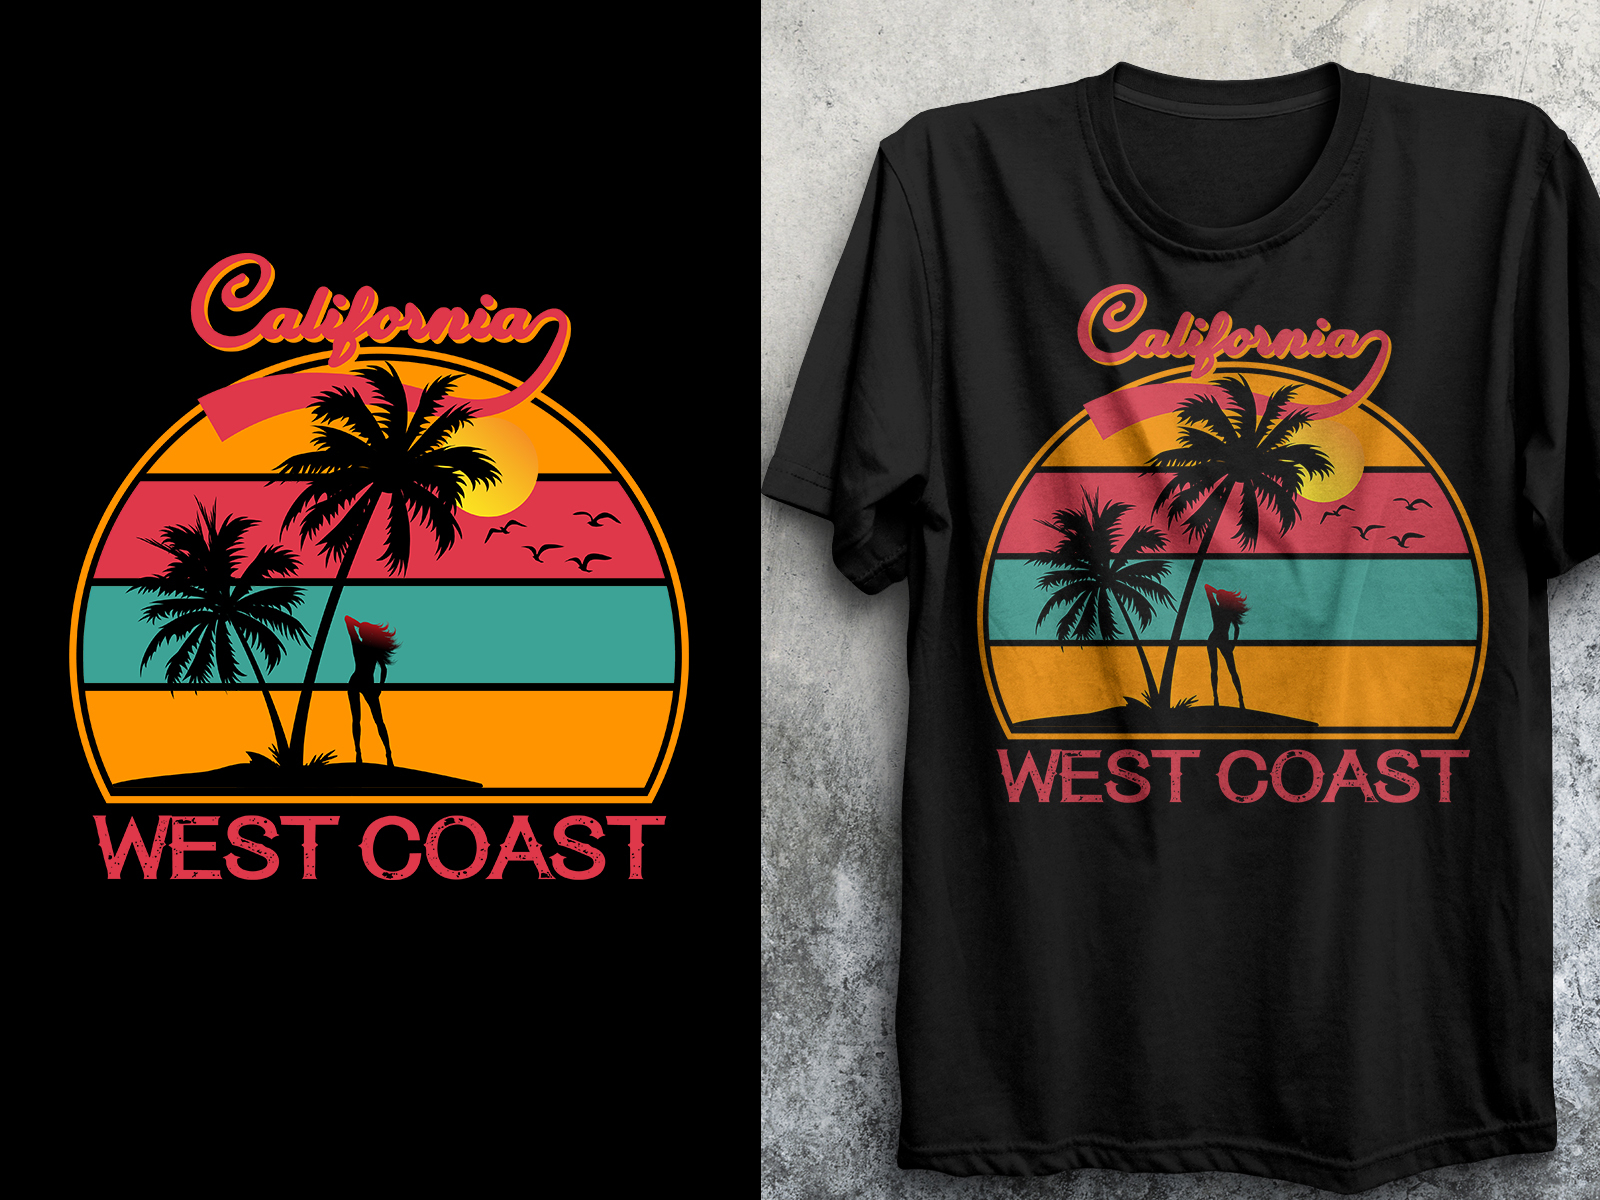 weer Opstand brandwond Unique Vintage Retro T-Shirt Design by Md Shawon Sheikh on Dribbble